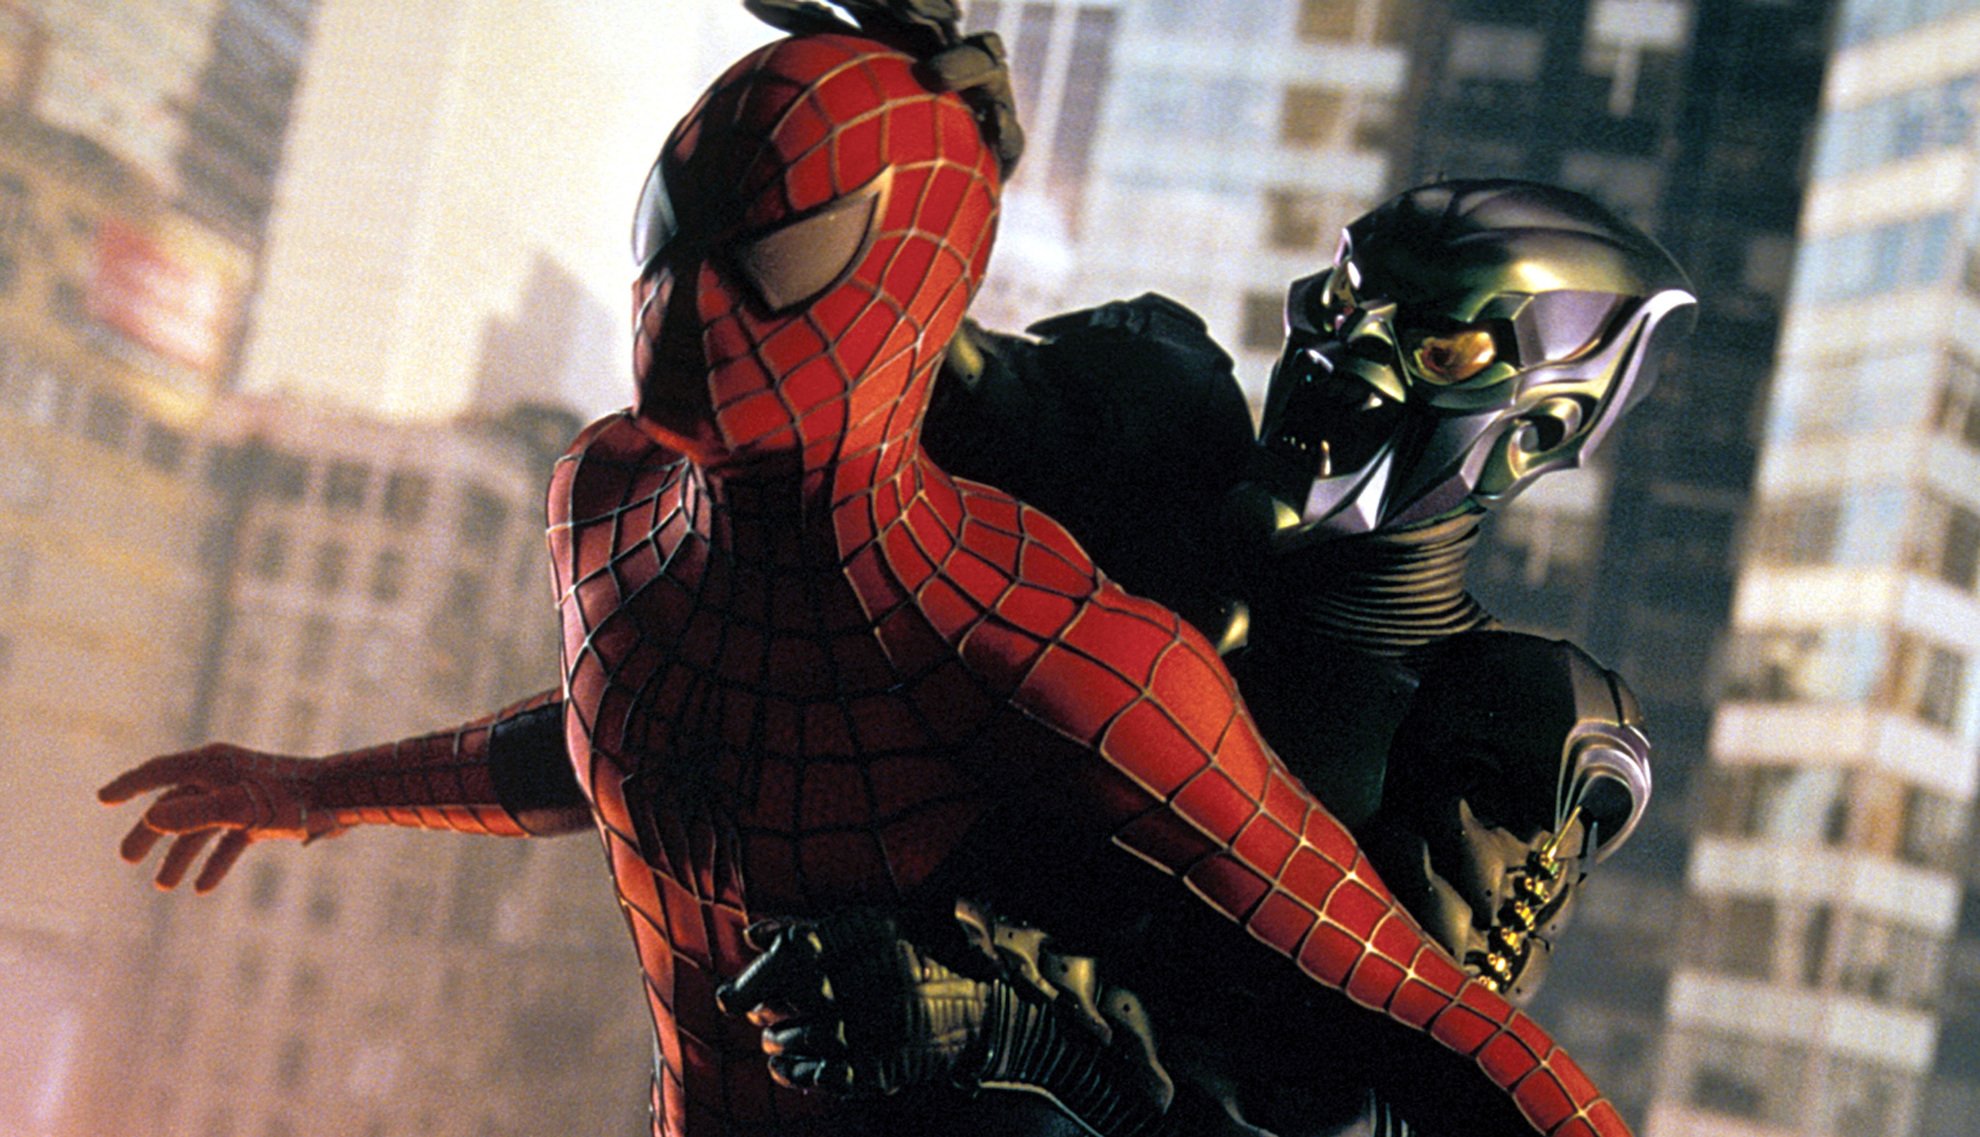 Spider-Man (Tobey Maguire) fighting the Green Goblin in 'Spider-Man' (2002)